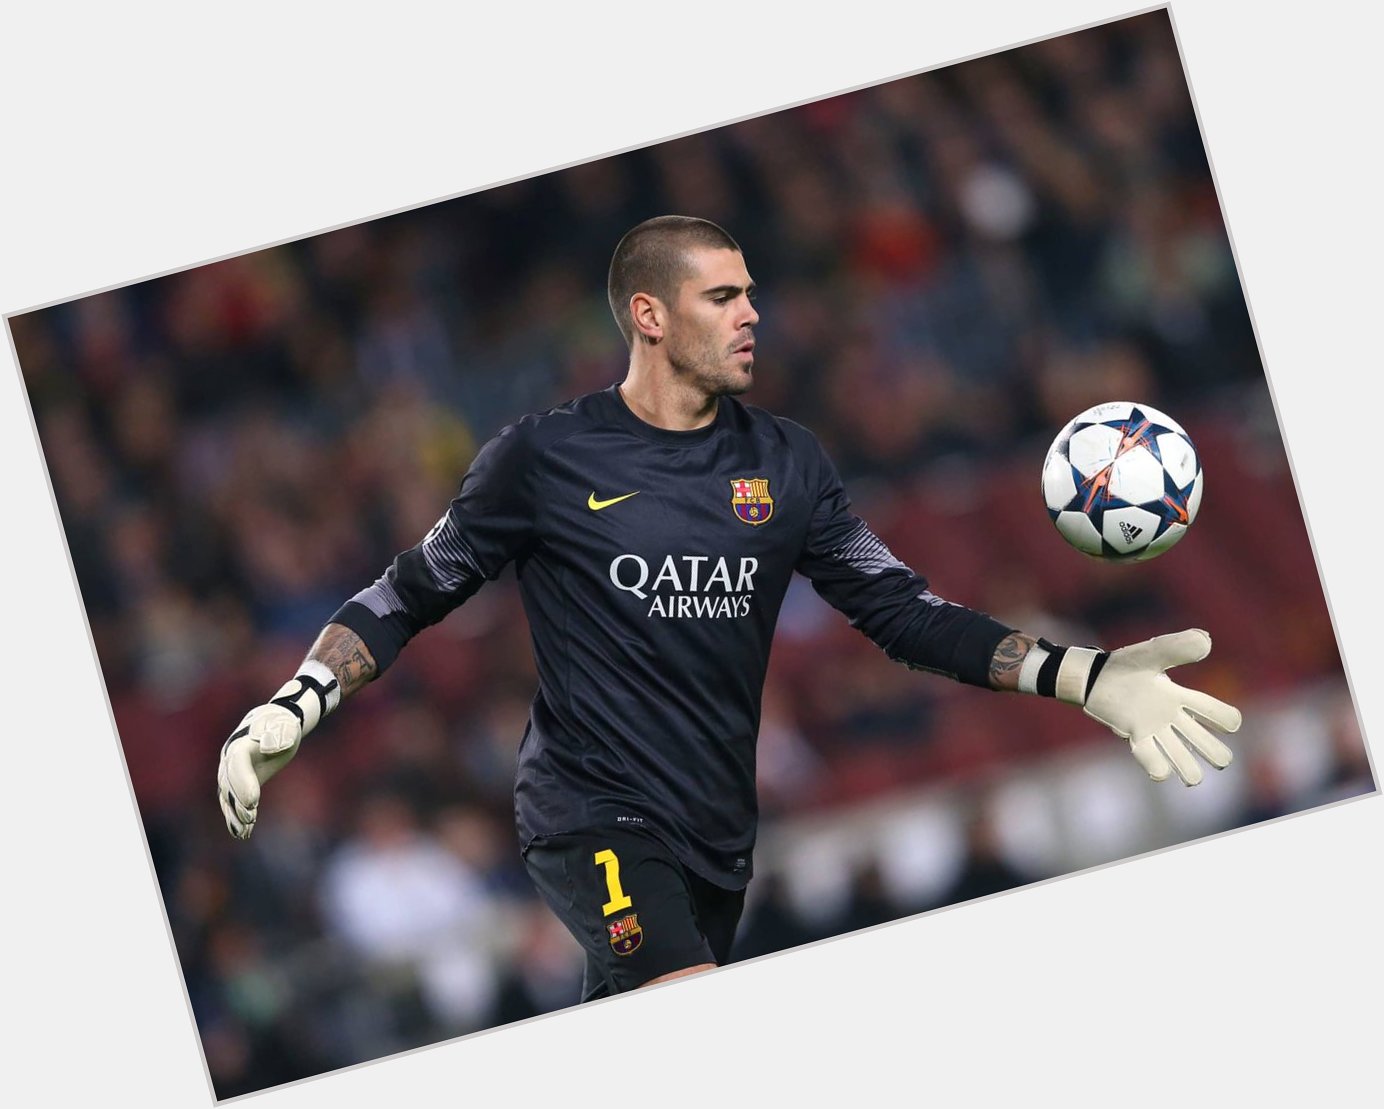 Happy birthday to Barcelona legend Victor Valdes, who turns 37 today! 